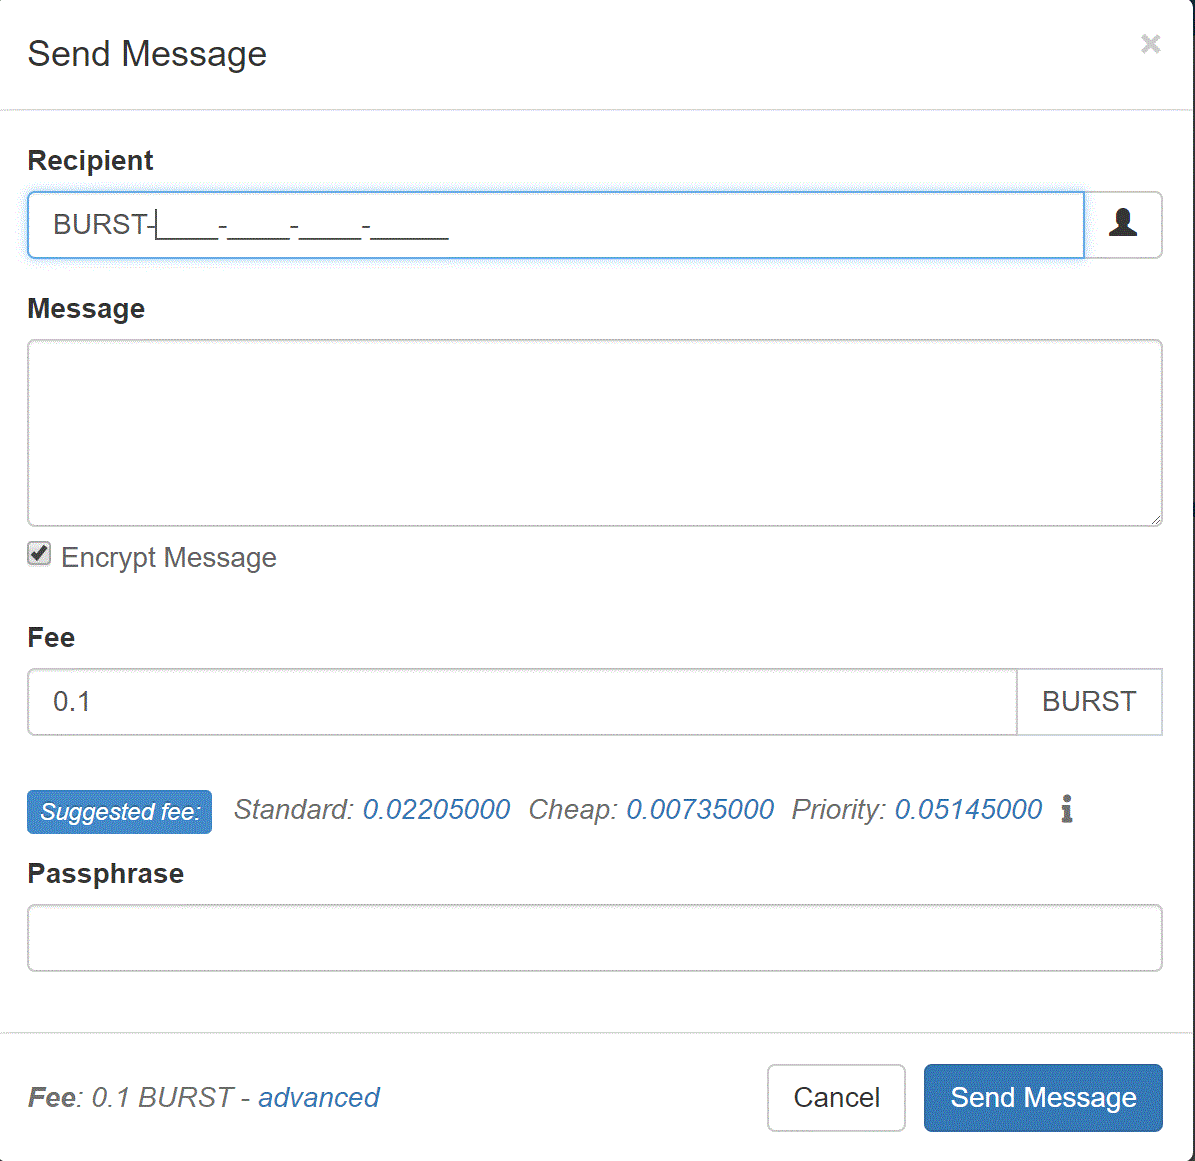 Image showing fields for sending messages using the Burstcoin wallet